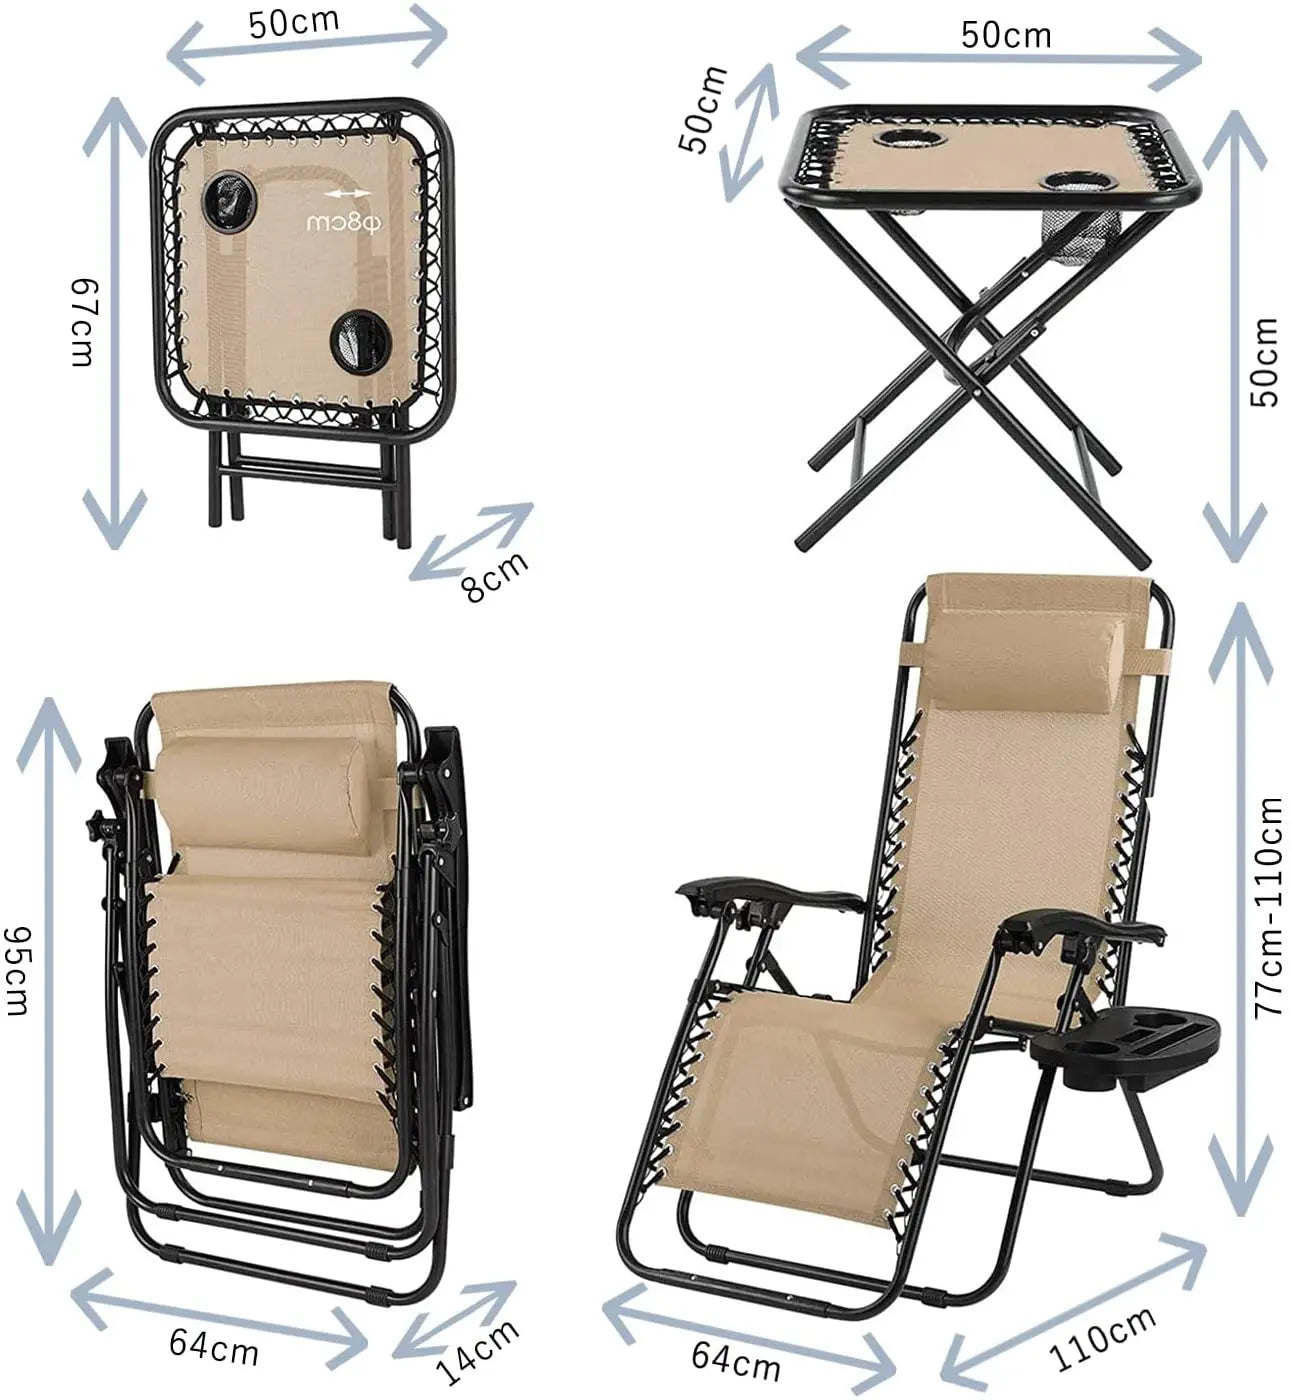 Zero Gravity Chair Foldable with Side Table,Cup Holder,Adjustable Head Cushion for Garden Outdoor